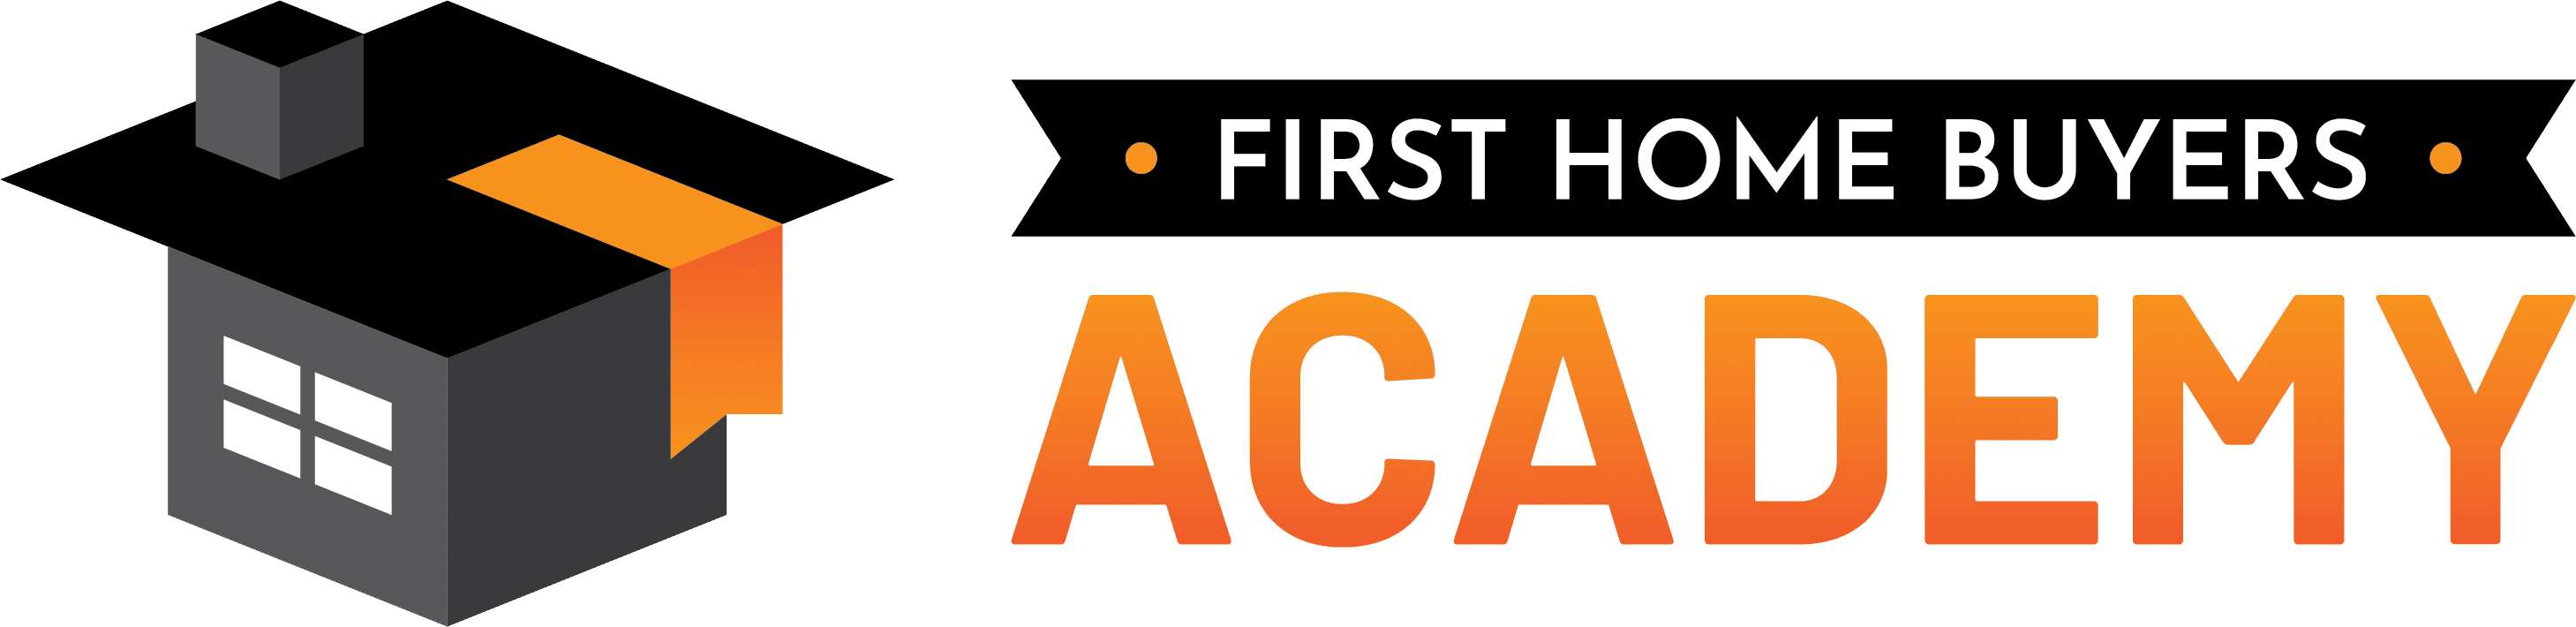 First Home Buyers Academy Investor Property